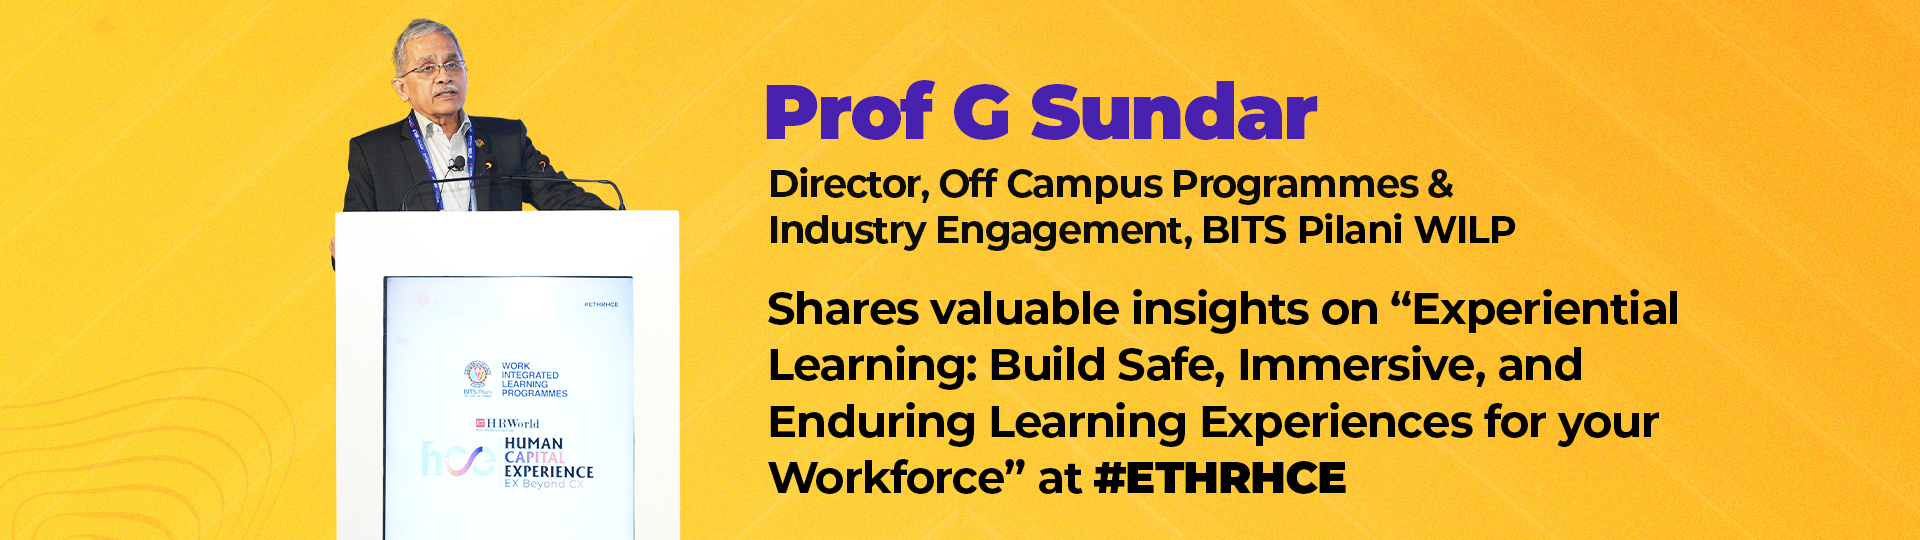 Prof. G. Sundar, Director Off Campus Programmes and Industry Engagement —BITS Pilani, WILP, shares how we can create safe, immersive, and enduring workplace learning experiences to improve employee experiences